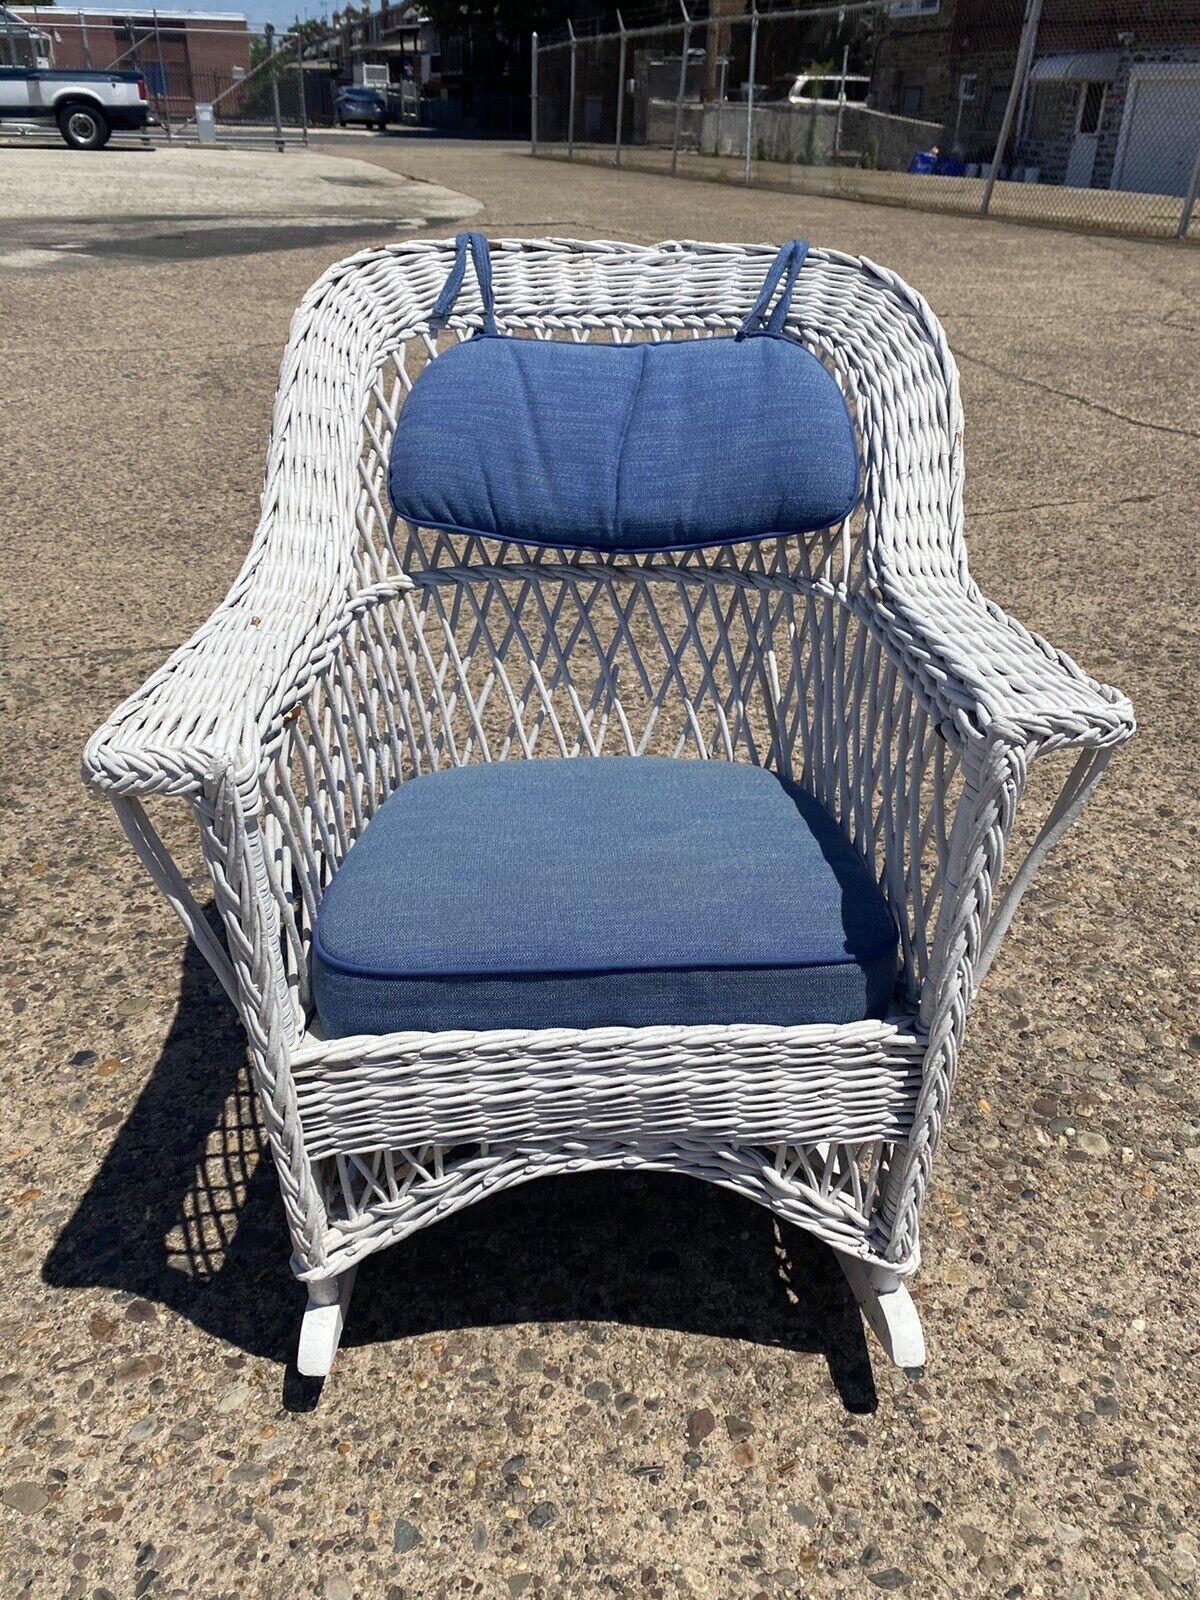 Antique American Victorian White Wicker sunroom rocking chair rocker. Item features wicker wrapped wooden frame, blue cushions, very nice antique item, great style and form. Circa early to Mid 20th Century. Measurements: 35